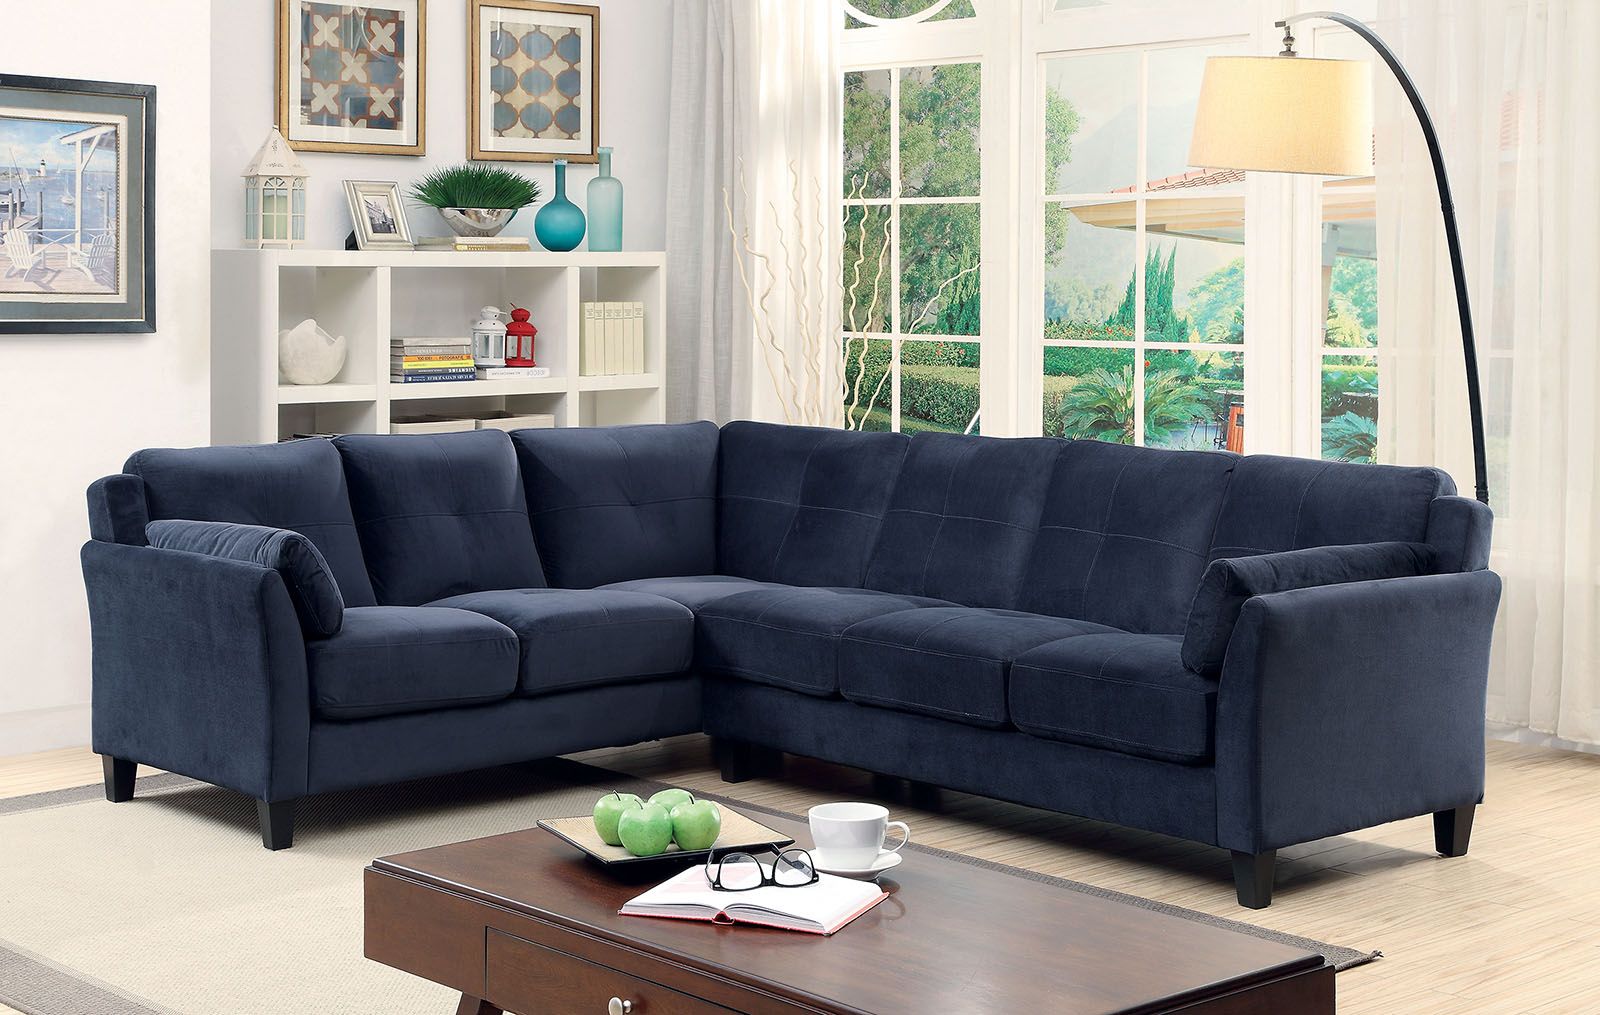 6368Nv Nvay Blue Contemporary Sectional Sofa Furniture Of Pertaining To Paul Modular Sectional Sofas Blue (View 3 of 15)